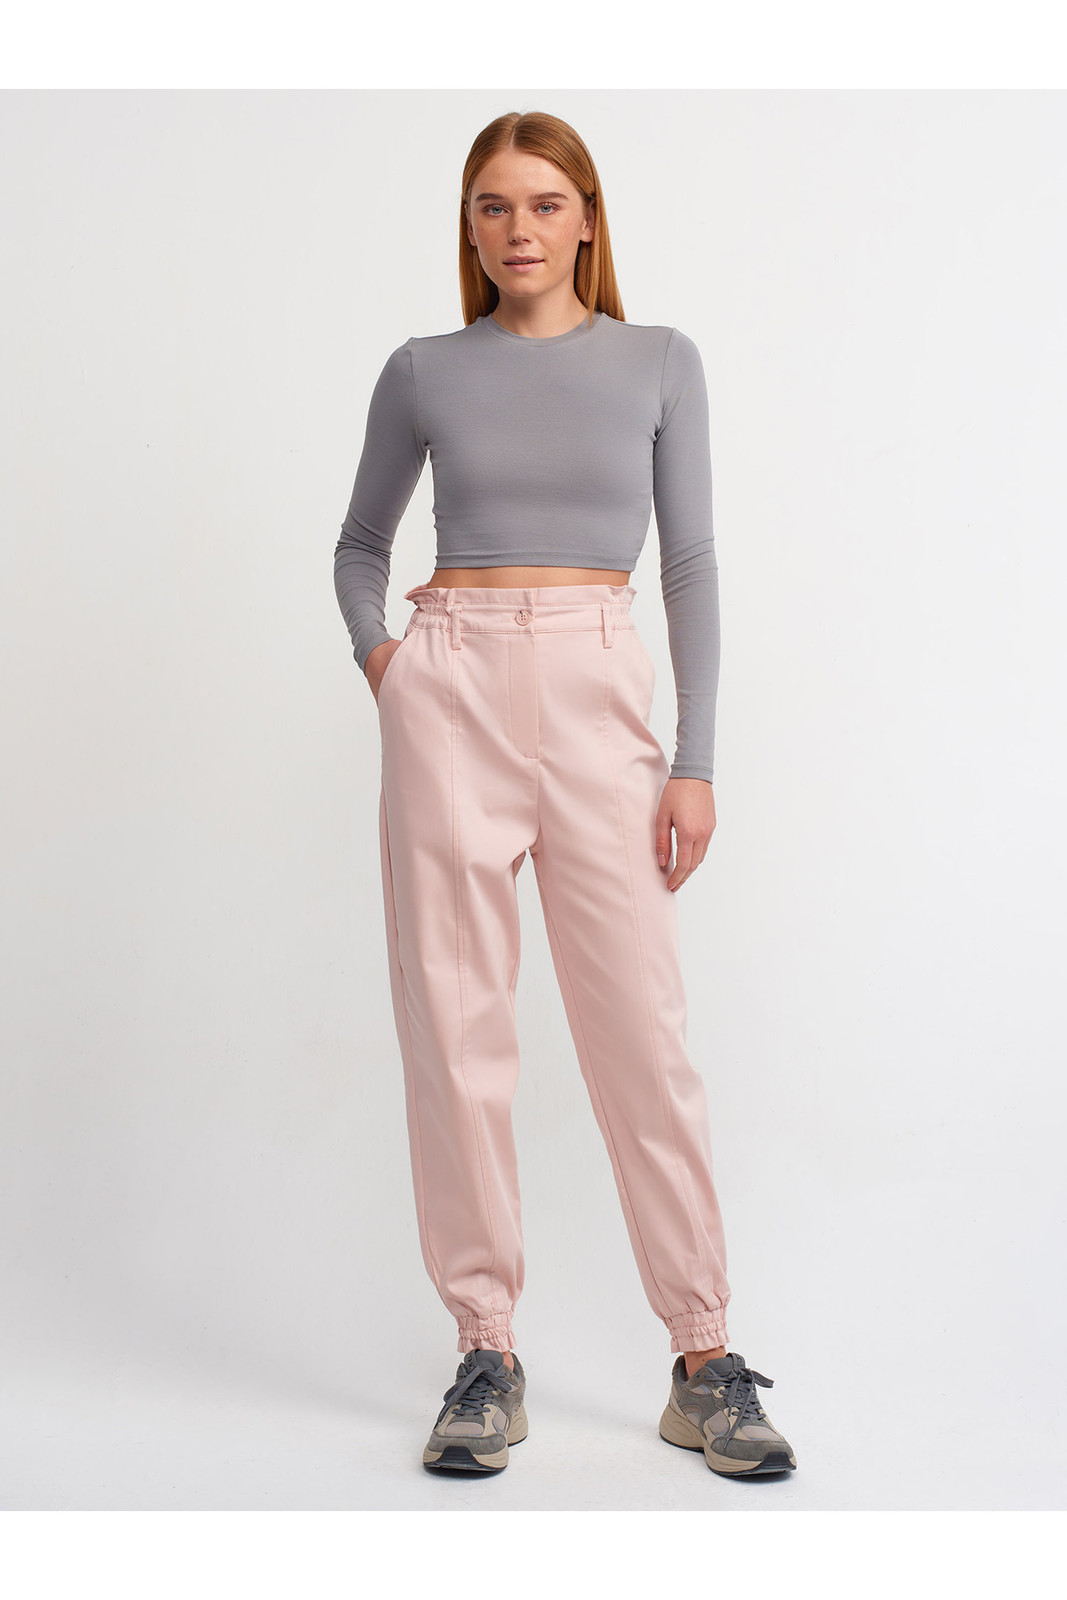 Dilvin 71107 Cupped Jogging Trousers-Powder